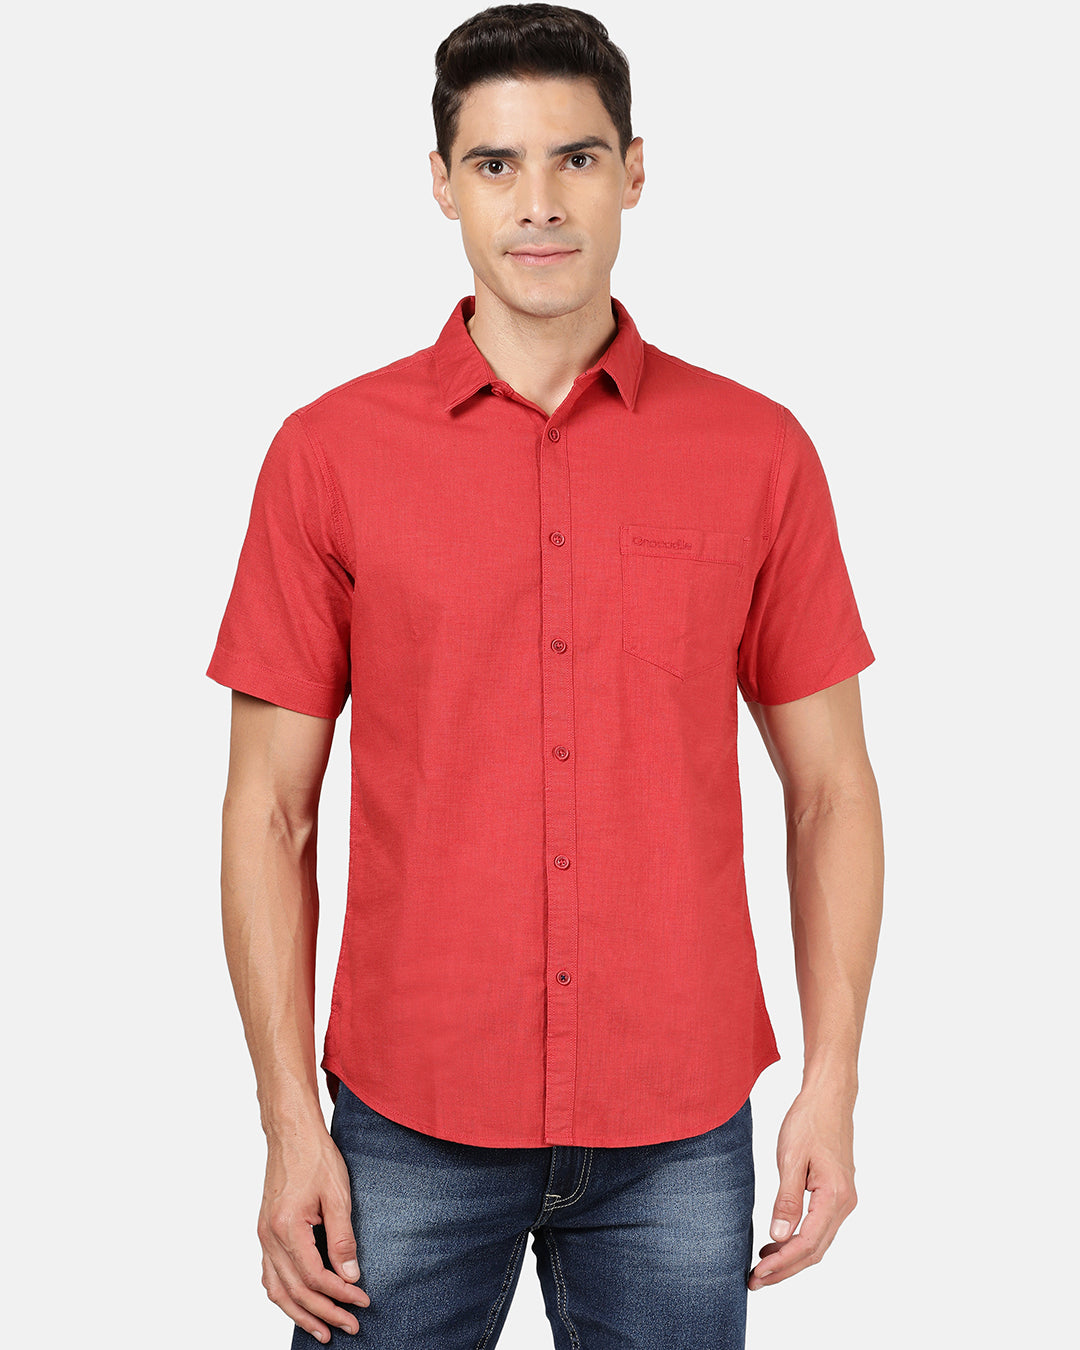 Crocodile Casual Half Sleeve Comfort Fit Solid Red with Collar Shirt for Men